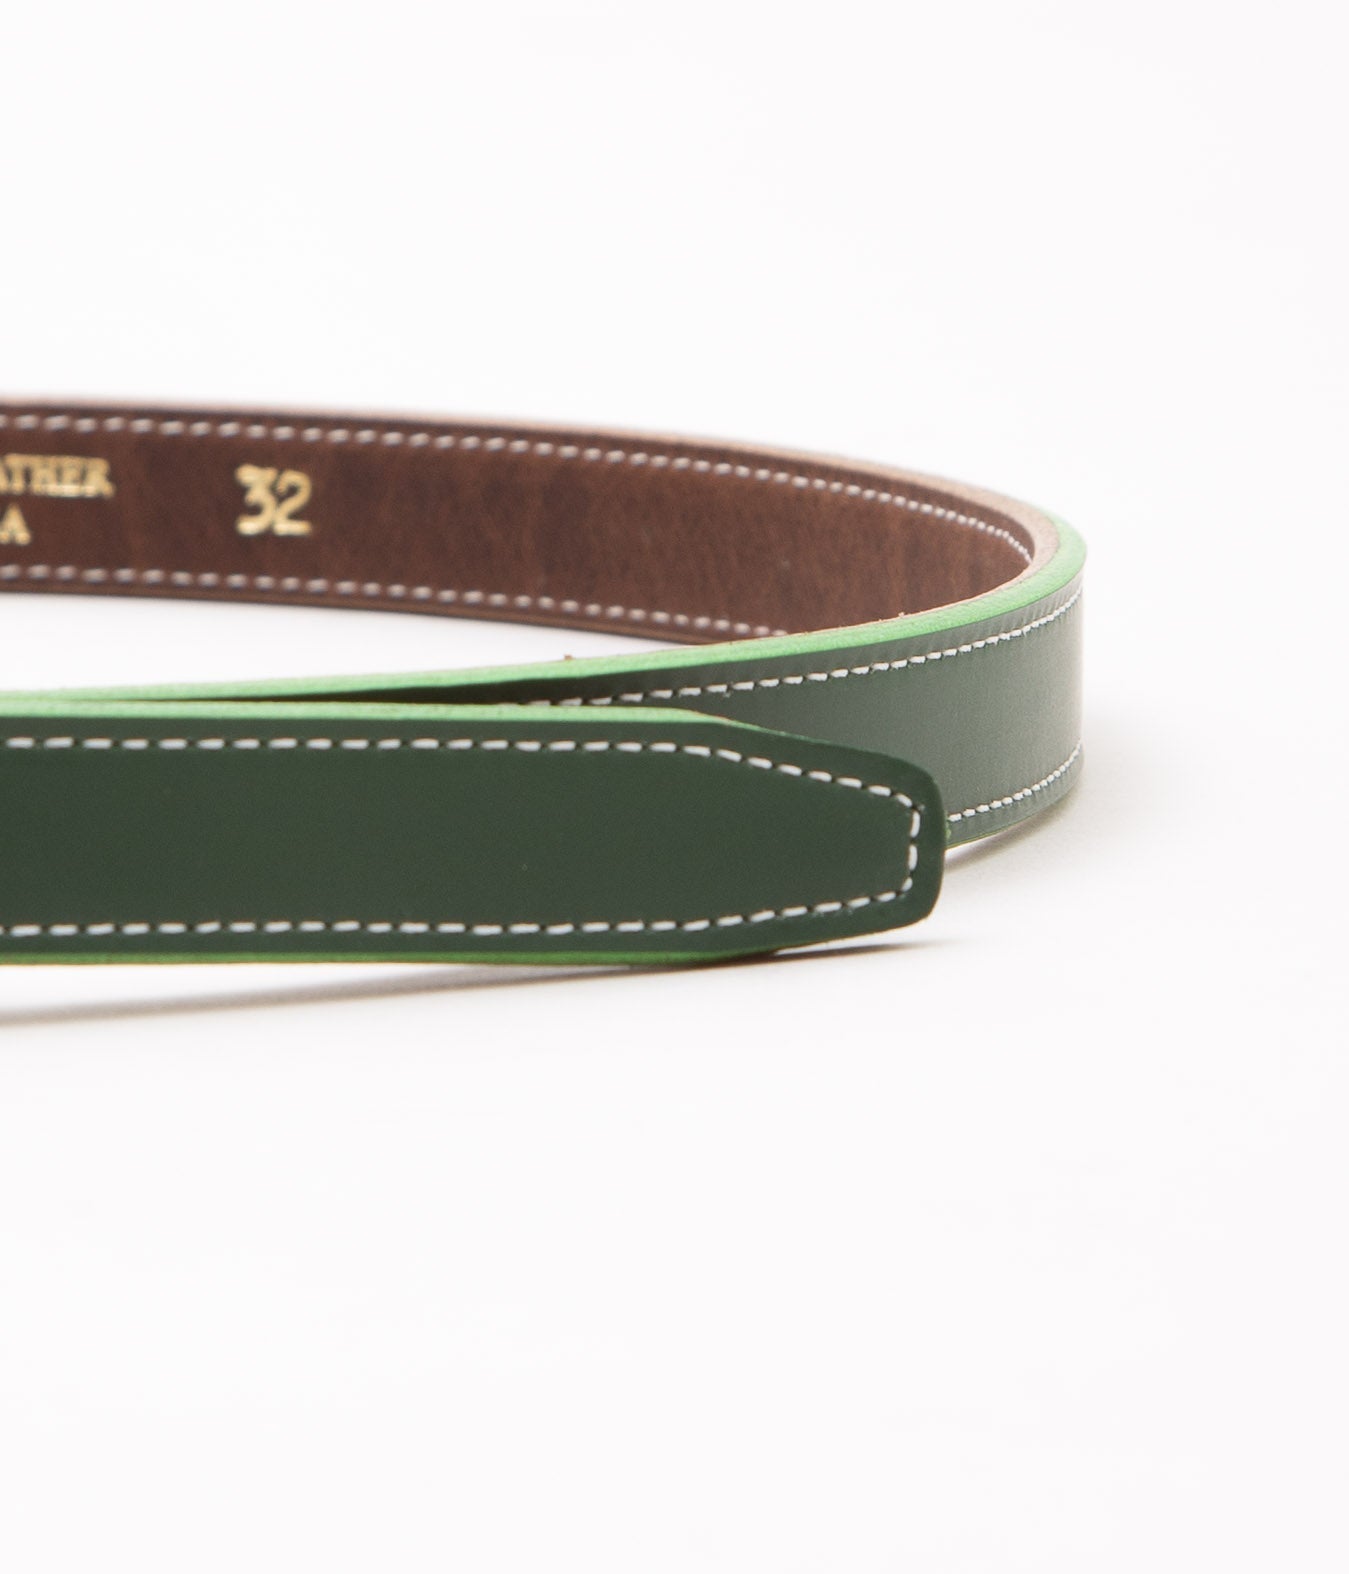 TORY LEATHER "【3005】 EQUESTRIAN INSPIRED BELT"(KELLY GREEN/BRASS)